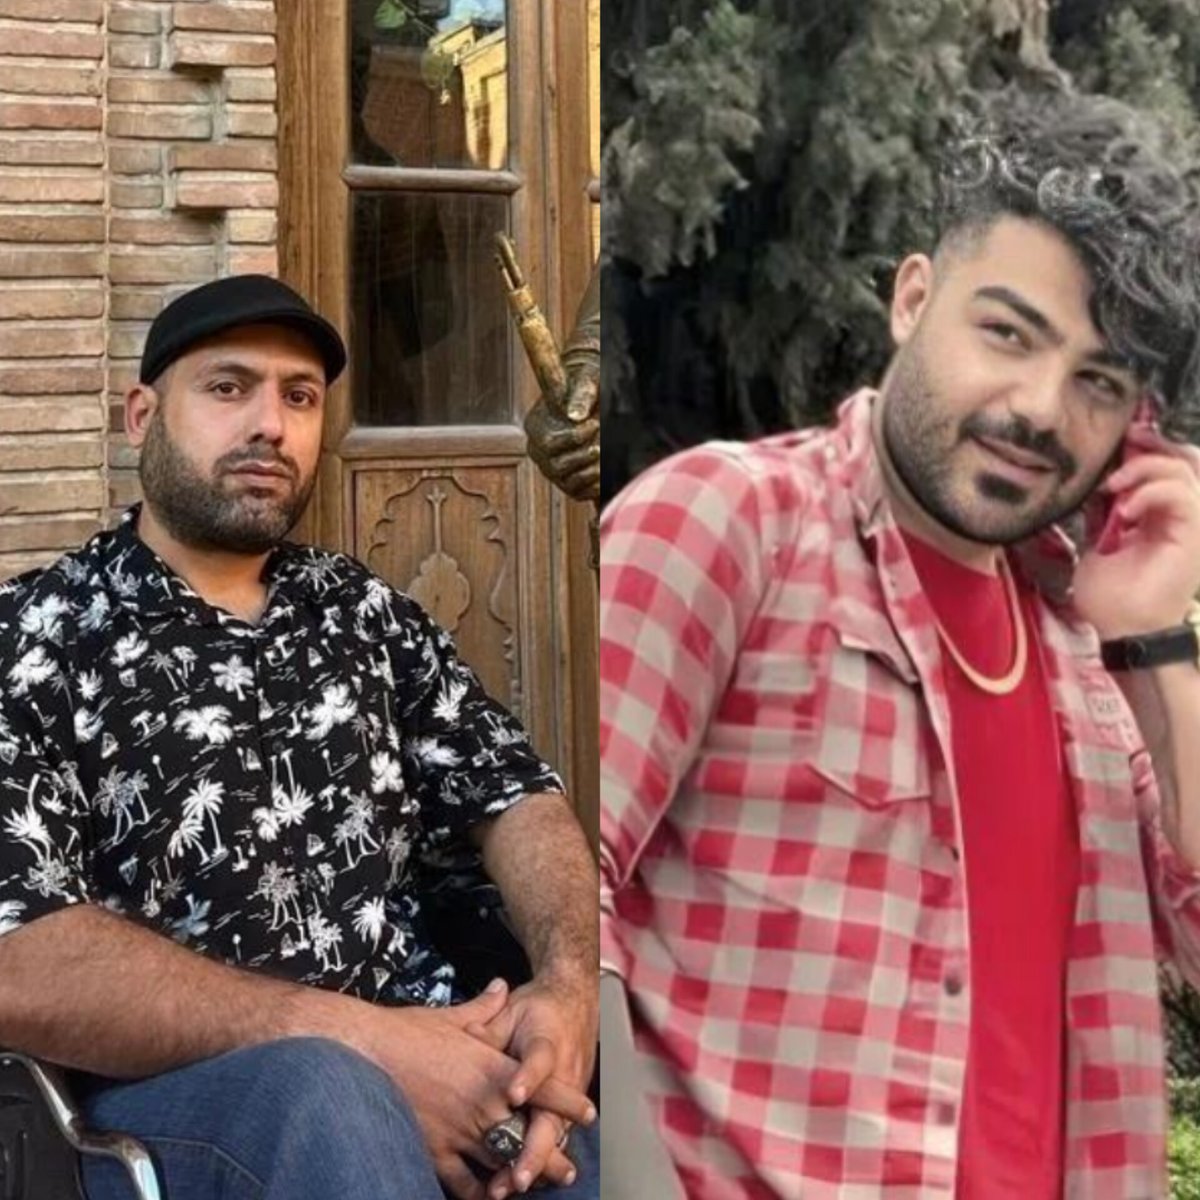 Considering the increase in executions and suicides in Iran's prisons and the inhumane conditions of political prisoners whose only crime was using the right to peaceful opposition. We demand justice for these loved ones. #IRPoliticalPrisonersVoice #KhaledPirzadeh #samanyasin